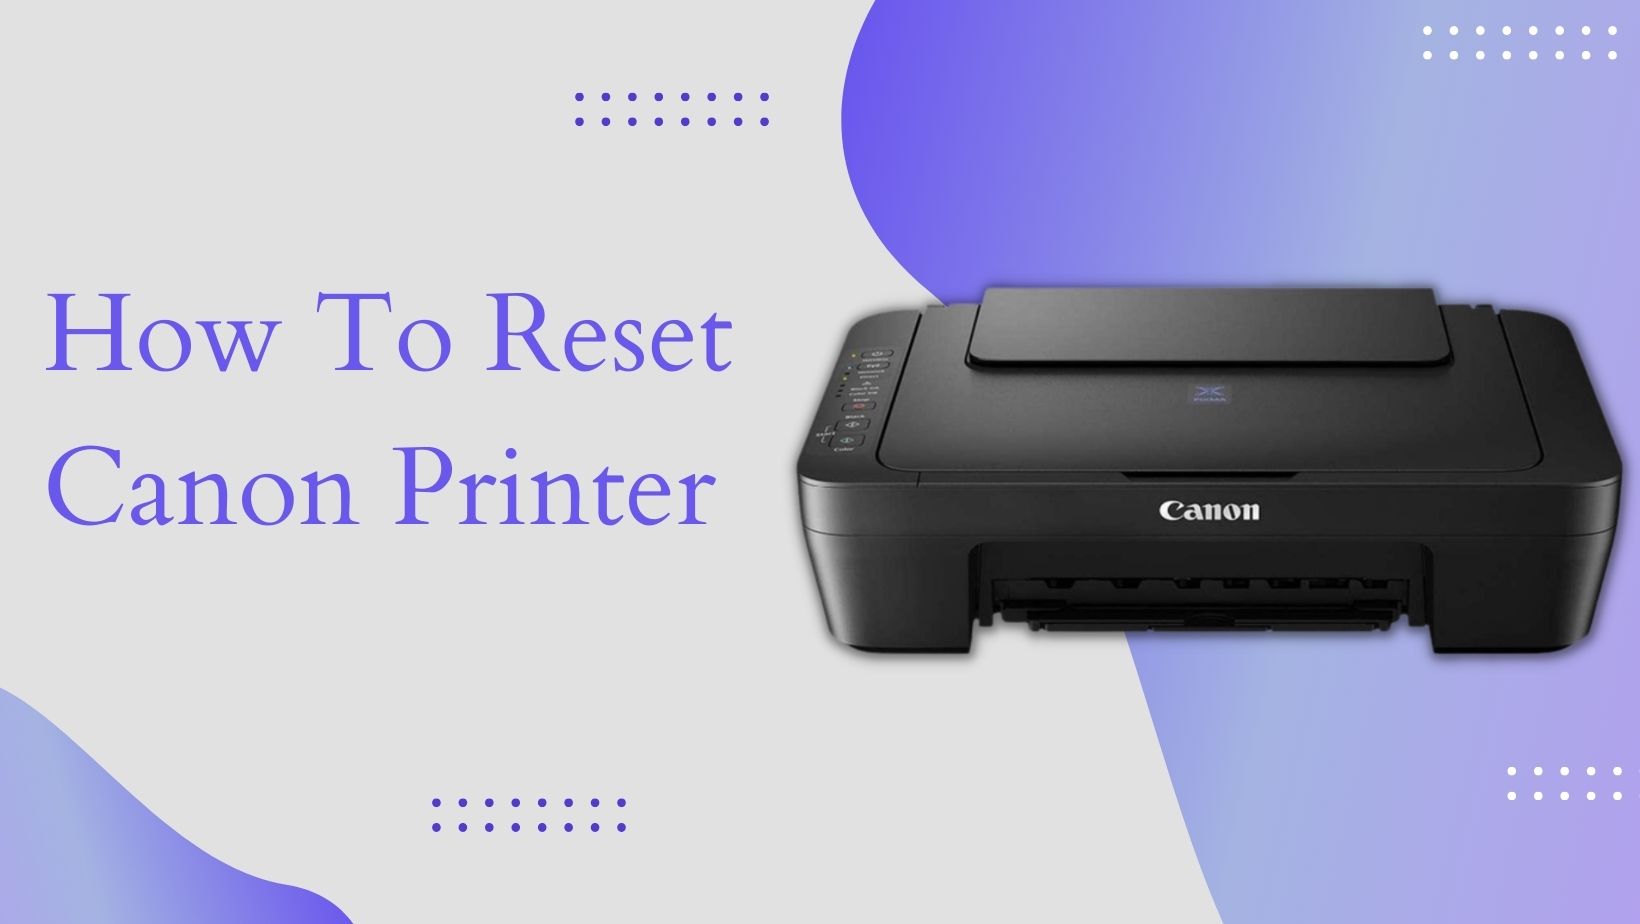 How to RESET Canon printer?